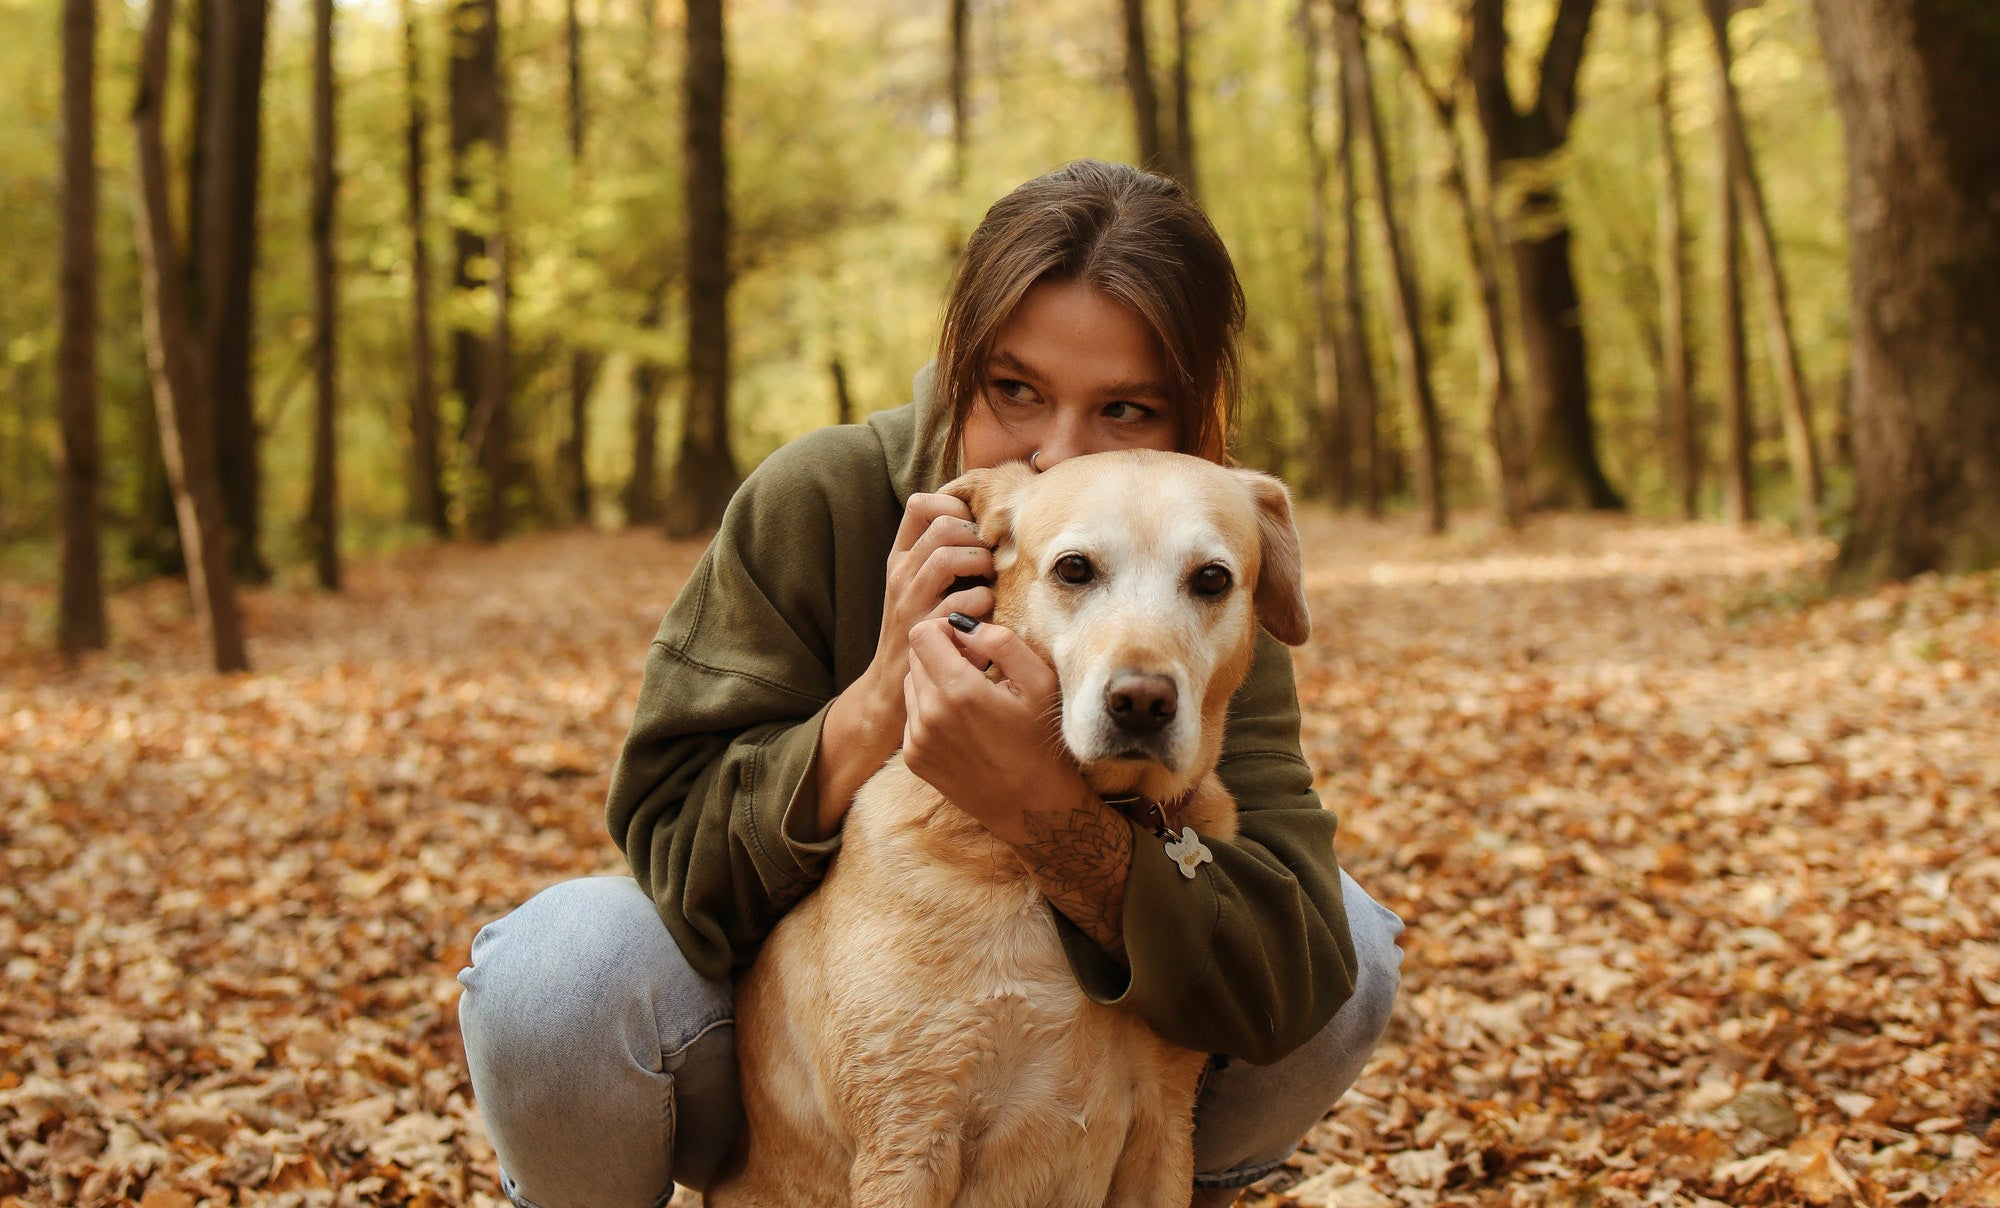 A young woman hugs a white dog from behind during a fall in the forest